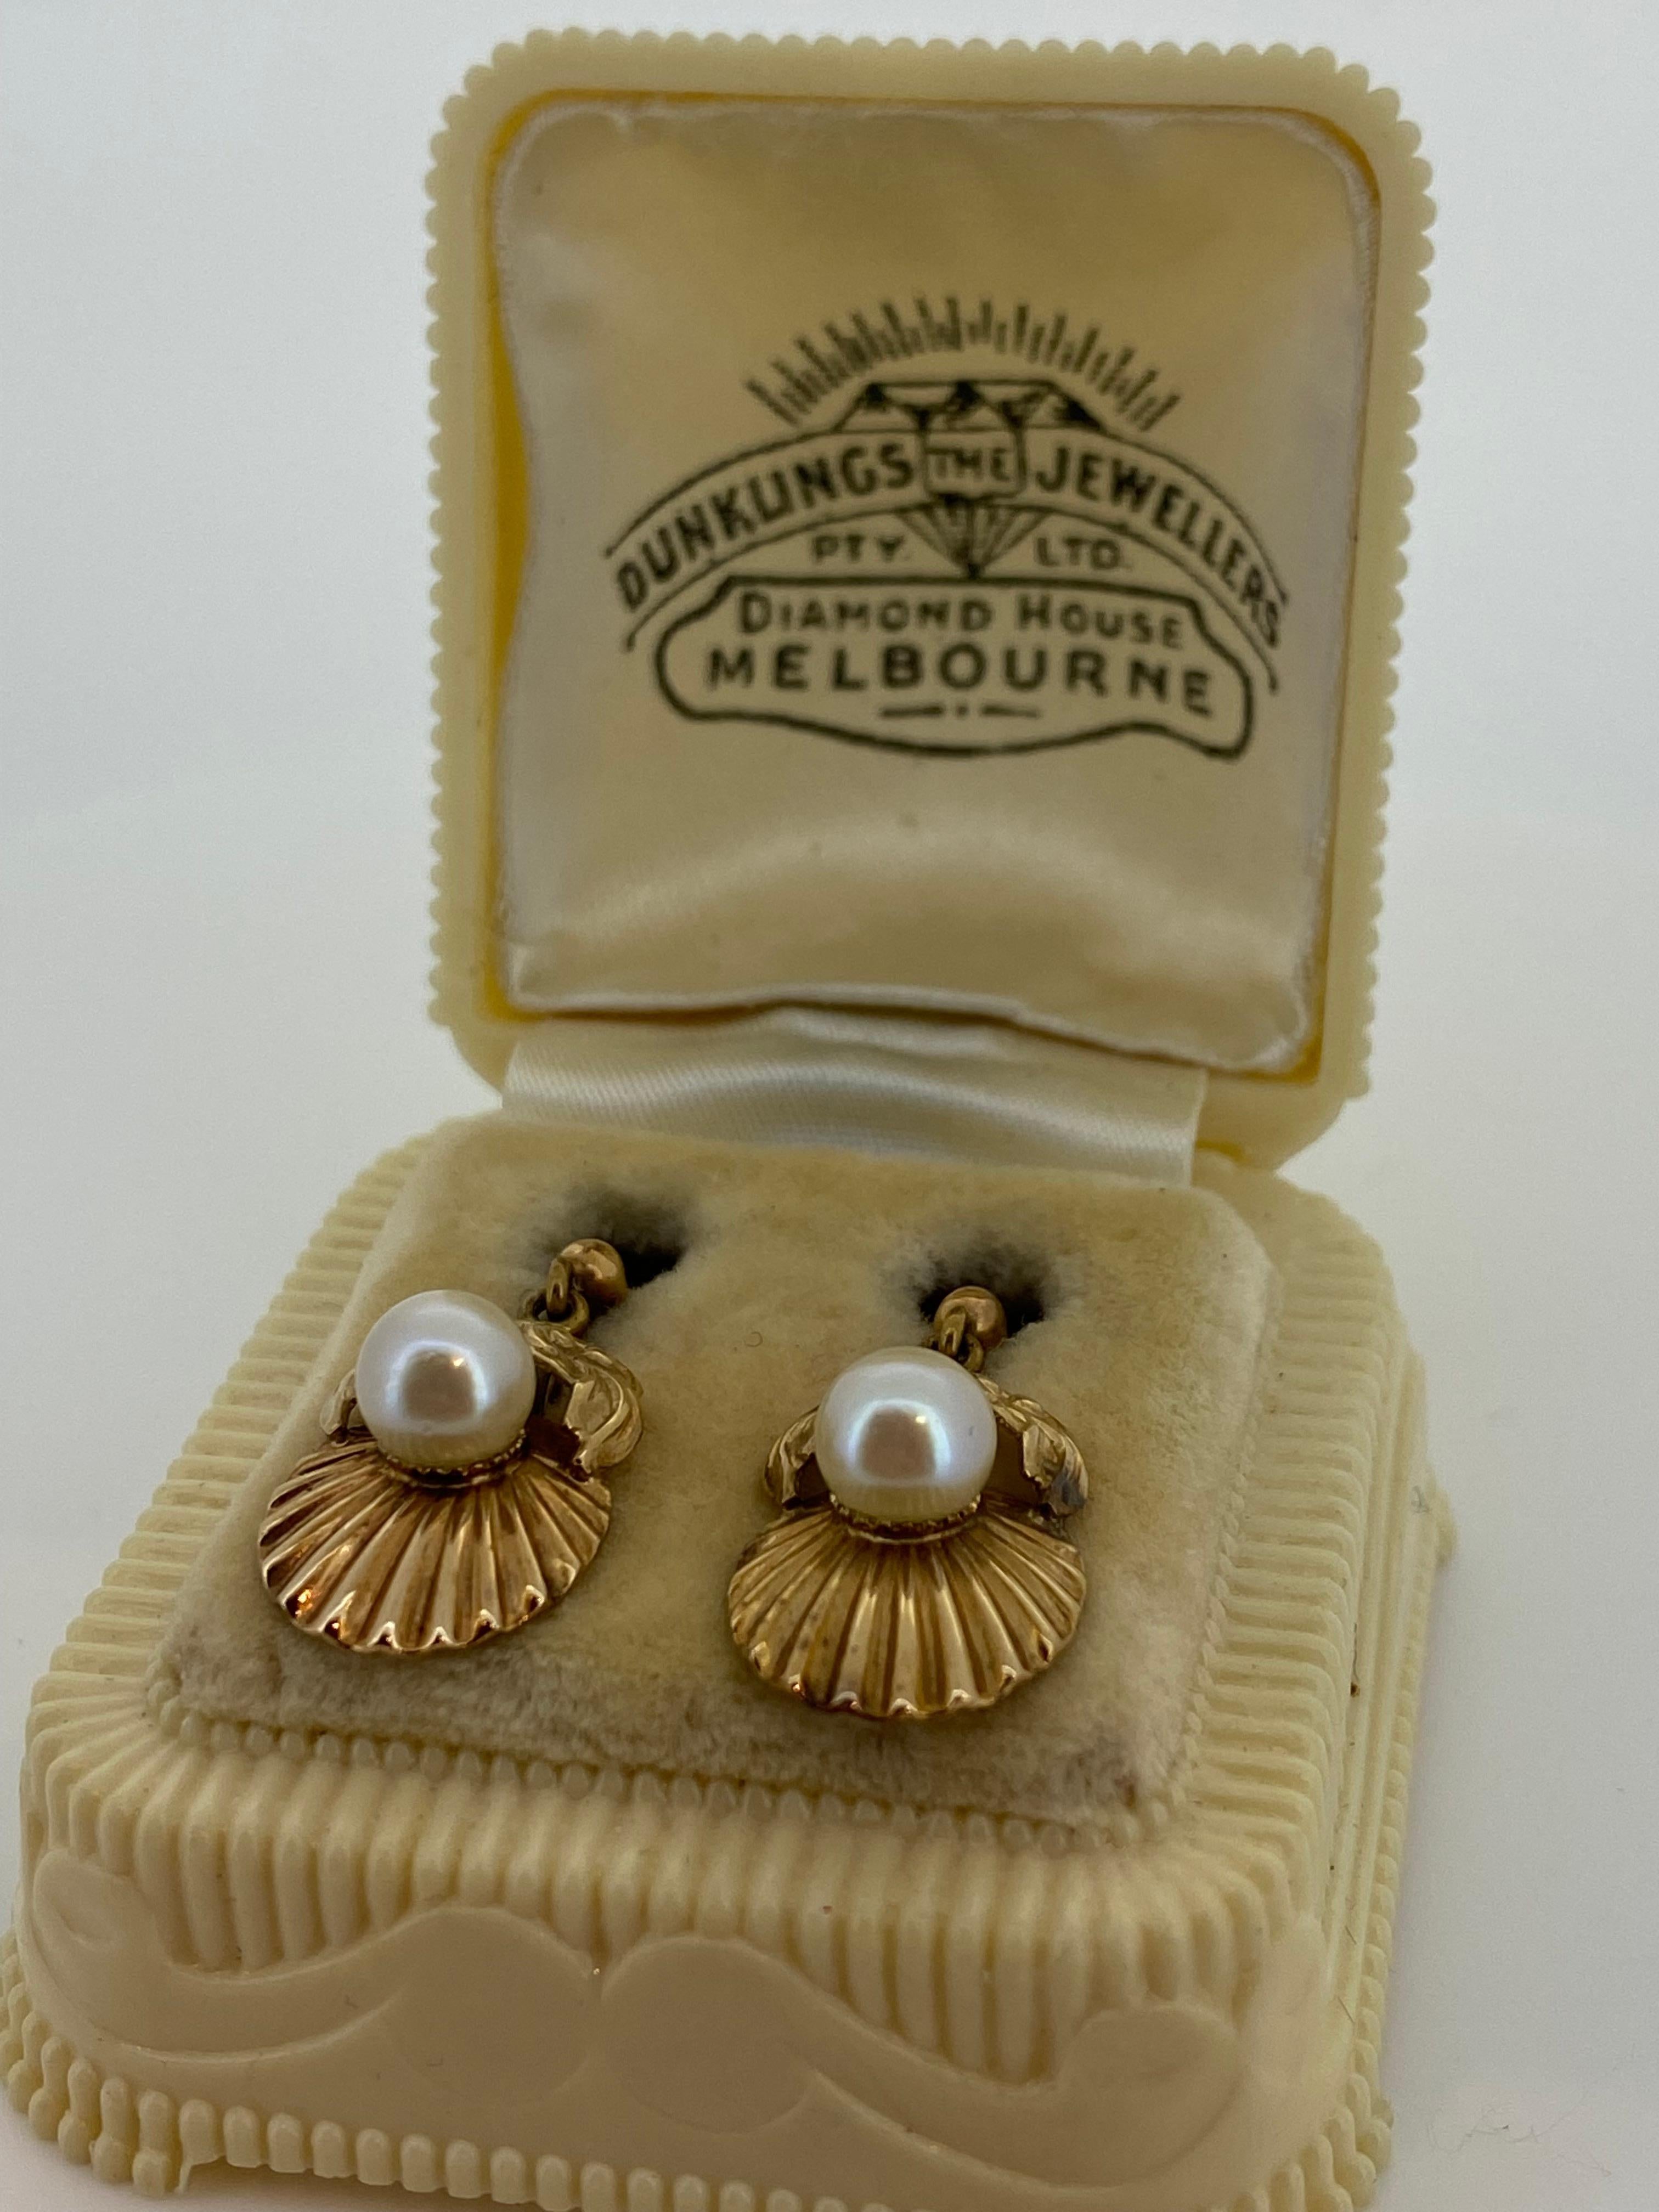 These Retro Clip on Earrings were retailed by Dunklings –

Renowned Melbourne jeweller – 

 

Meticulously crafted in 9K Rose Gold, 

this pair is retro, dating from 1950’s

 

Each designed as a shell centering a Pearl – 

of good colour & luster,